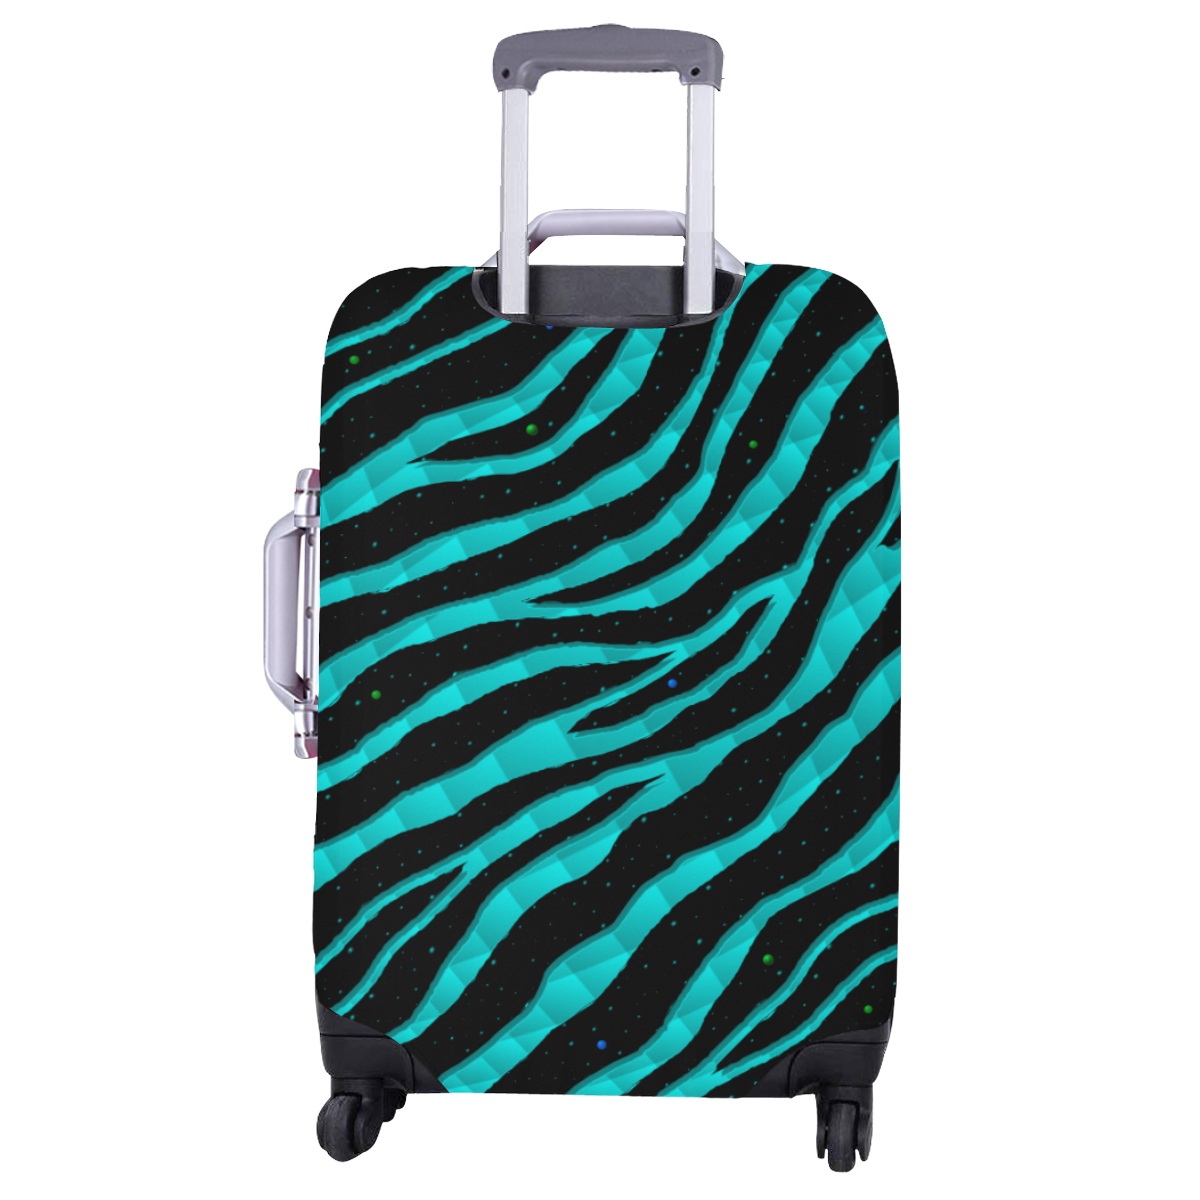 Ripped SpaceTime Stripes - Cyan Luggage Cover/Large 26"-28"